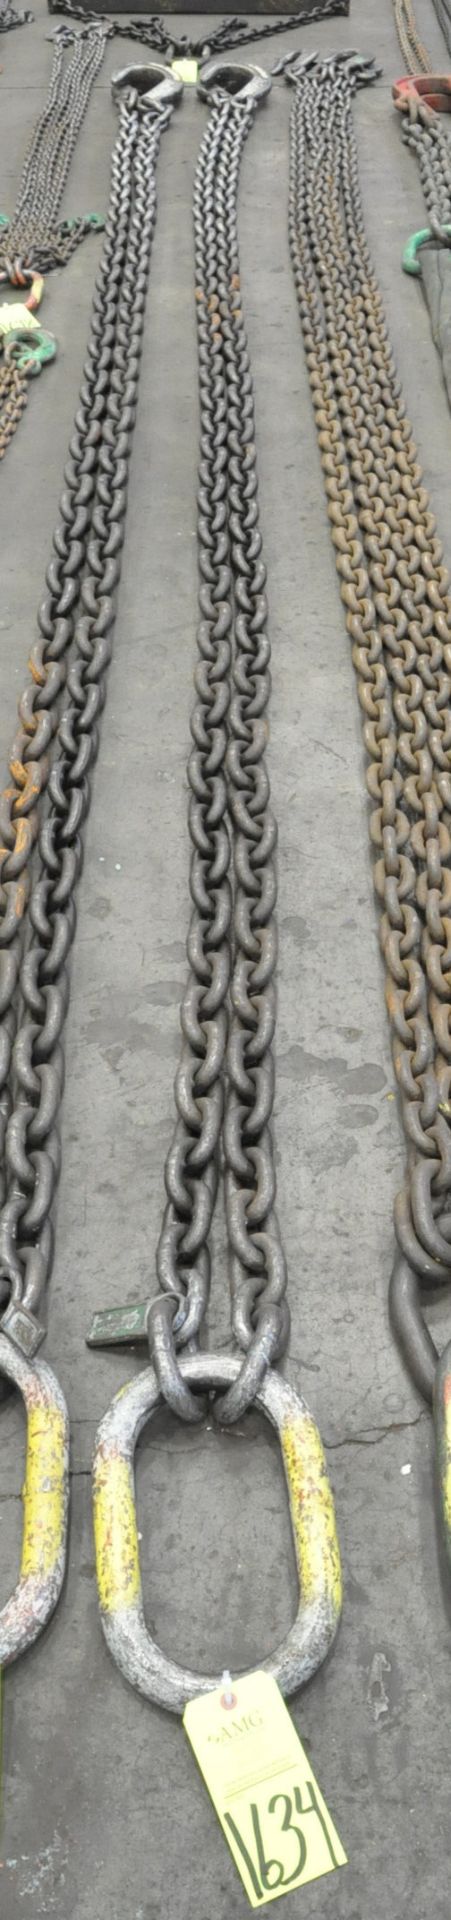 3/4" Link x 16' Long 2-Hook Chain Sling, Cert Tag, (G-24), (Yellow Tag)